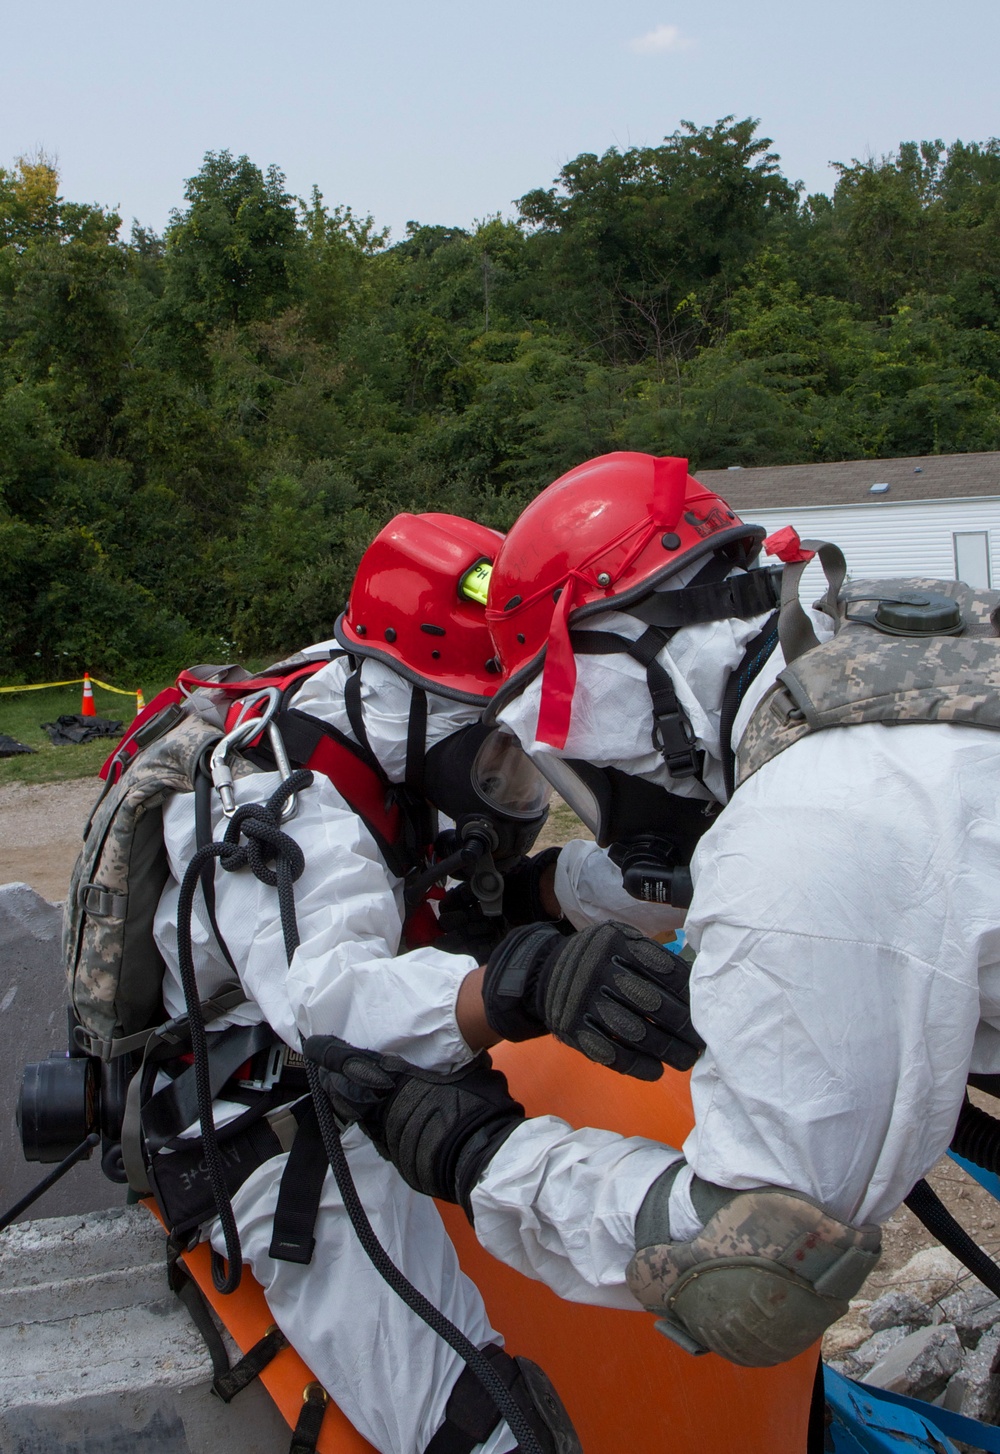 440th Chemical Company search and extraction